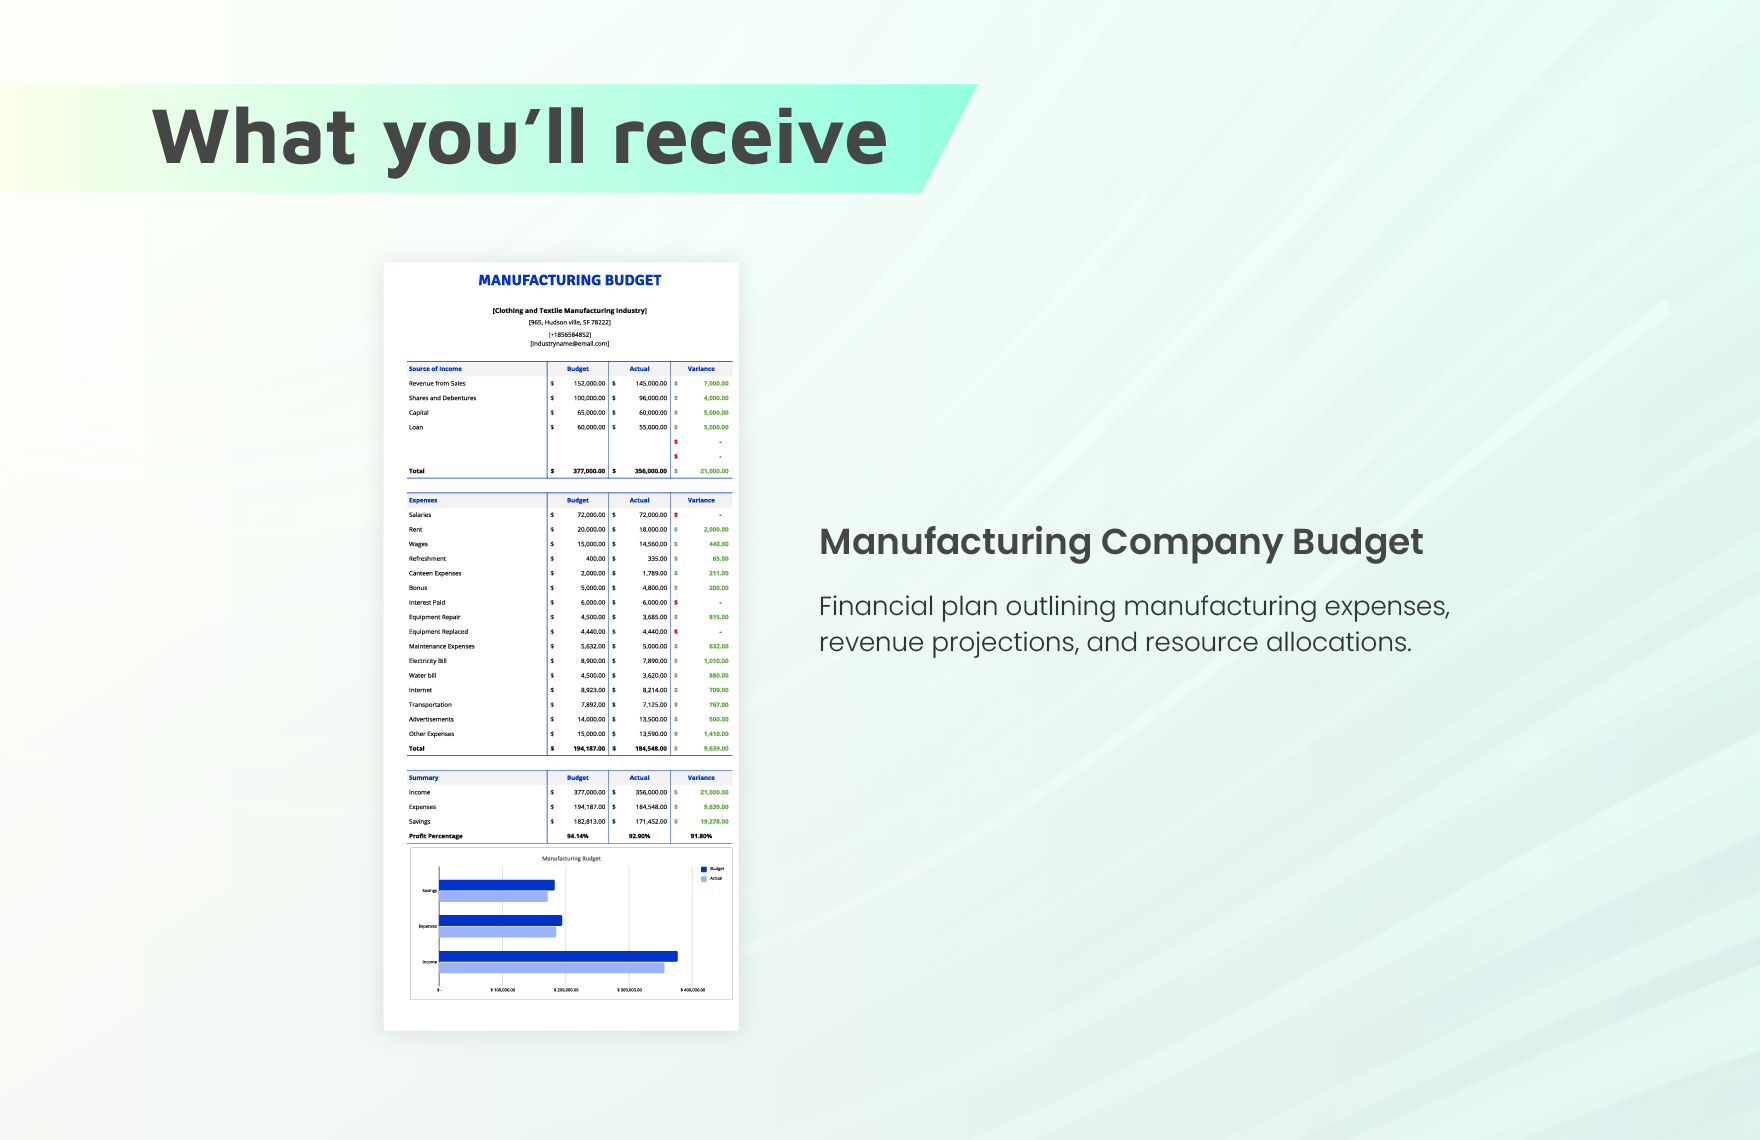 Manufacturing Company Budget Template